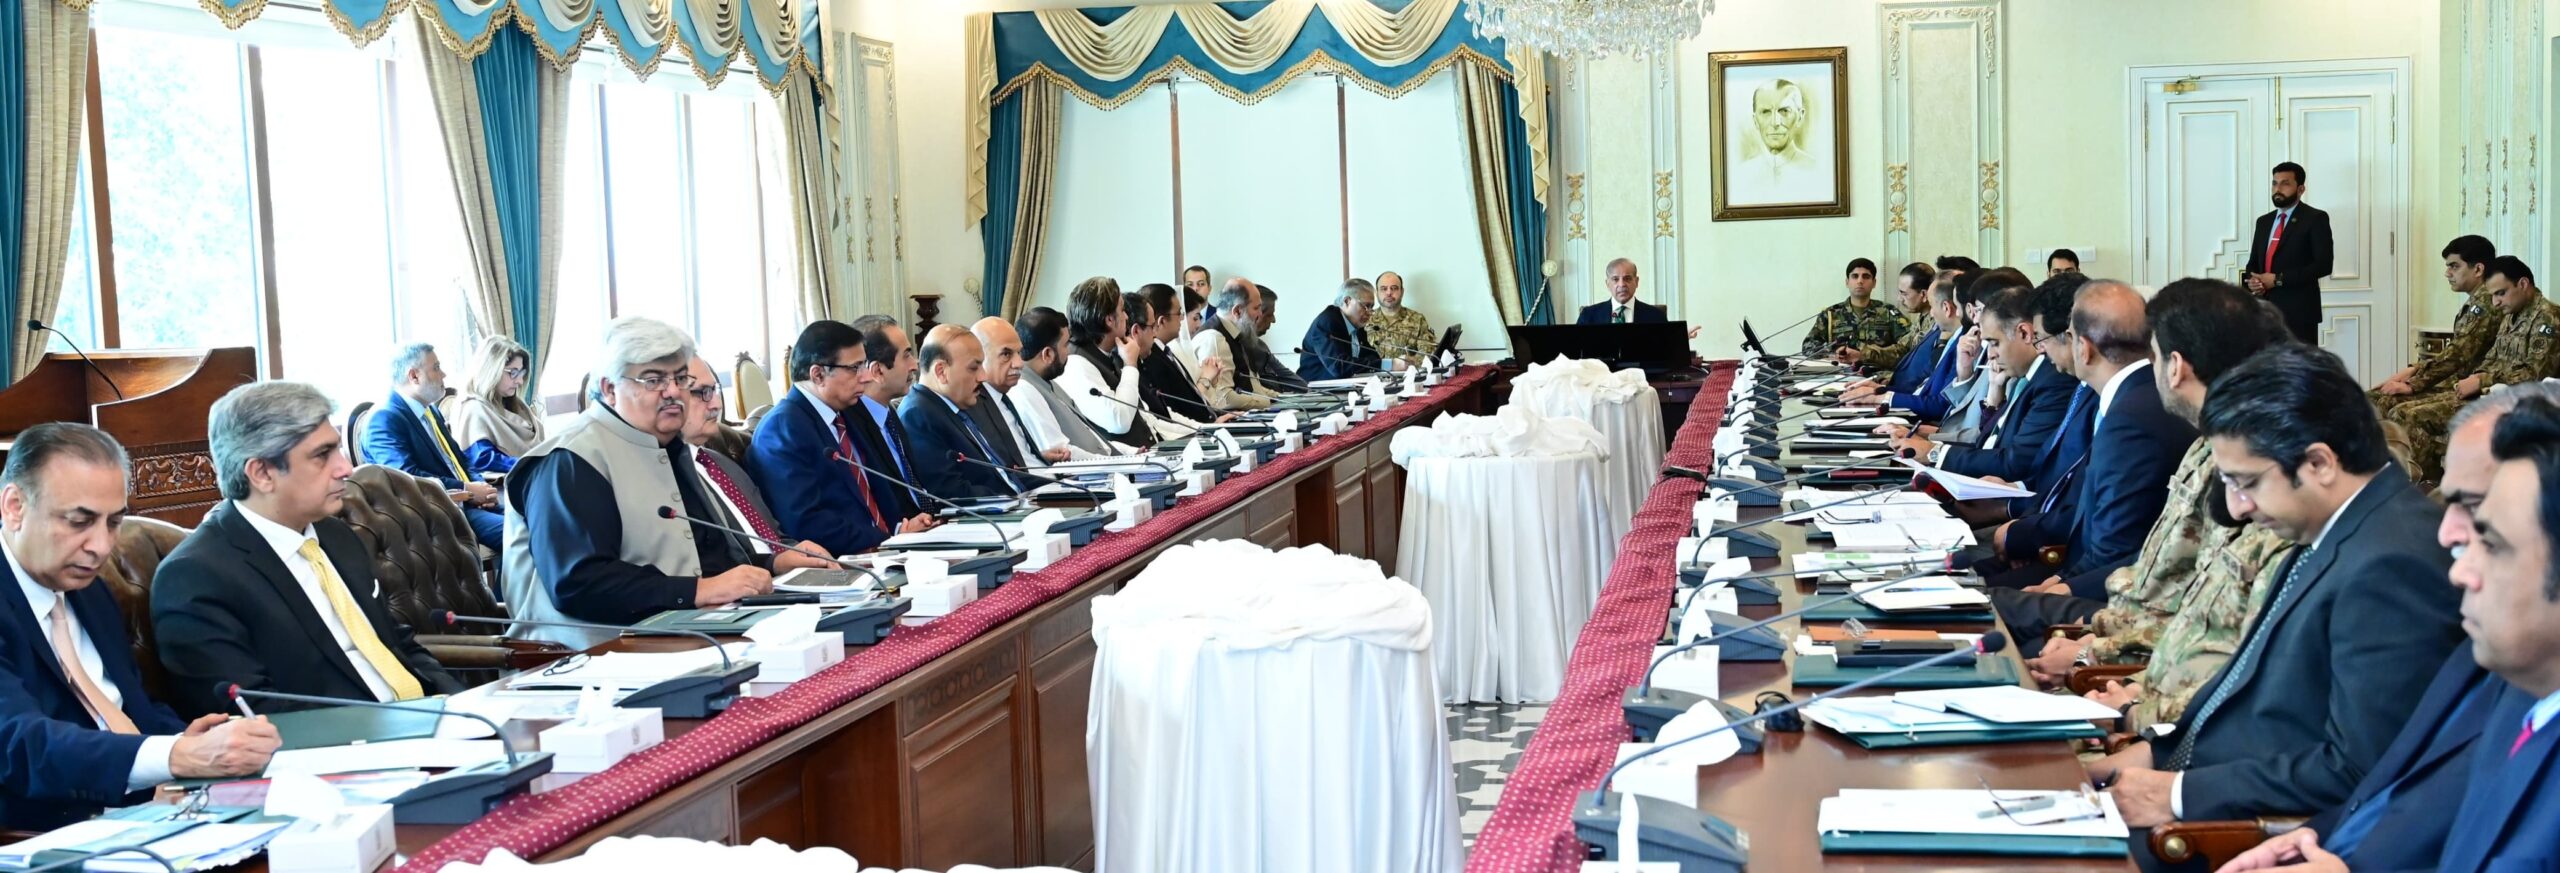 PM Shehbaz Sharif chairs a meeting on measures against the spectrum of illegal activities.